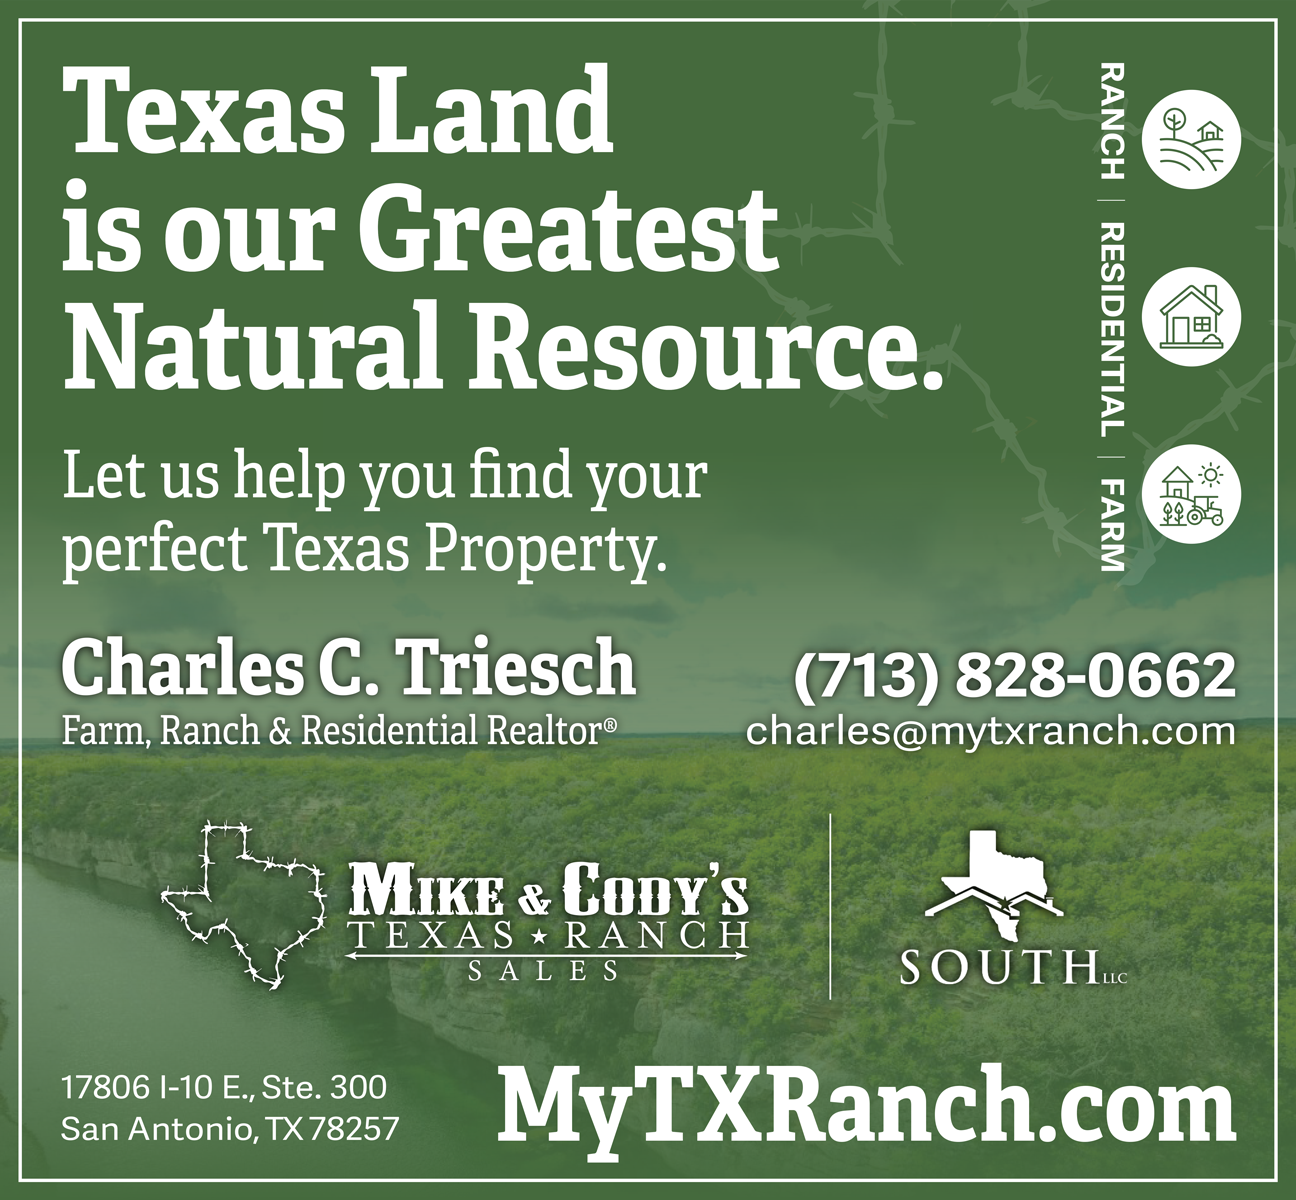  Let us help you find your perfect texas property.